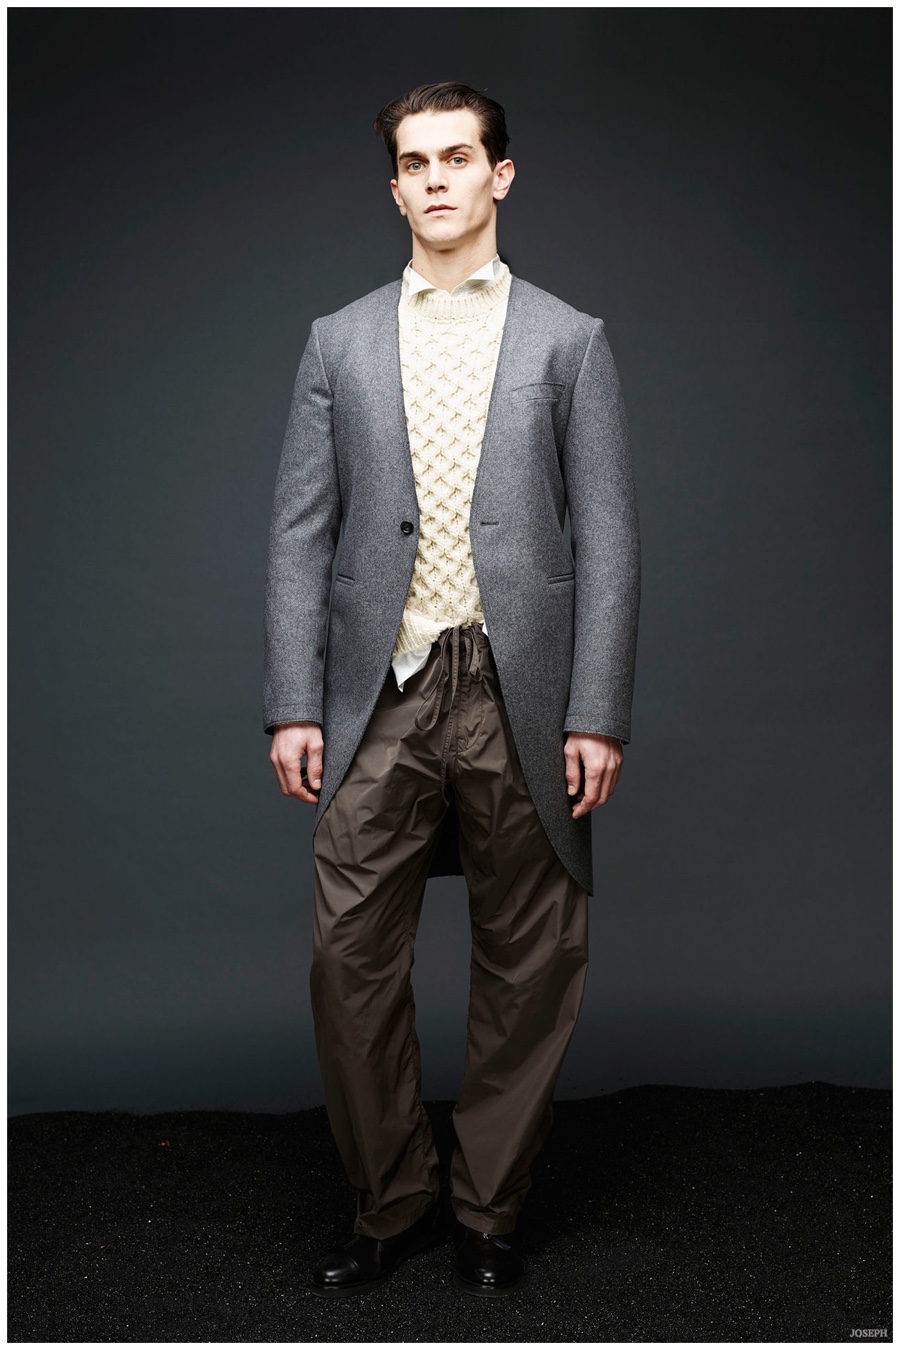 Joseph Furnishes Loose, Slouchy Fashions for Fall/Winter 2015 Menswear ...